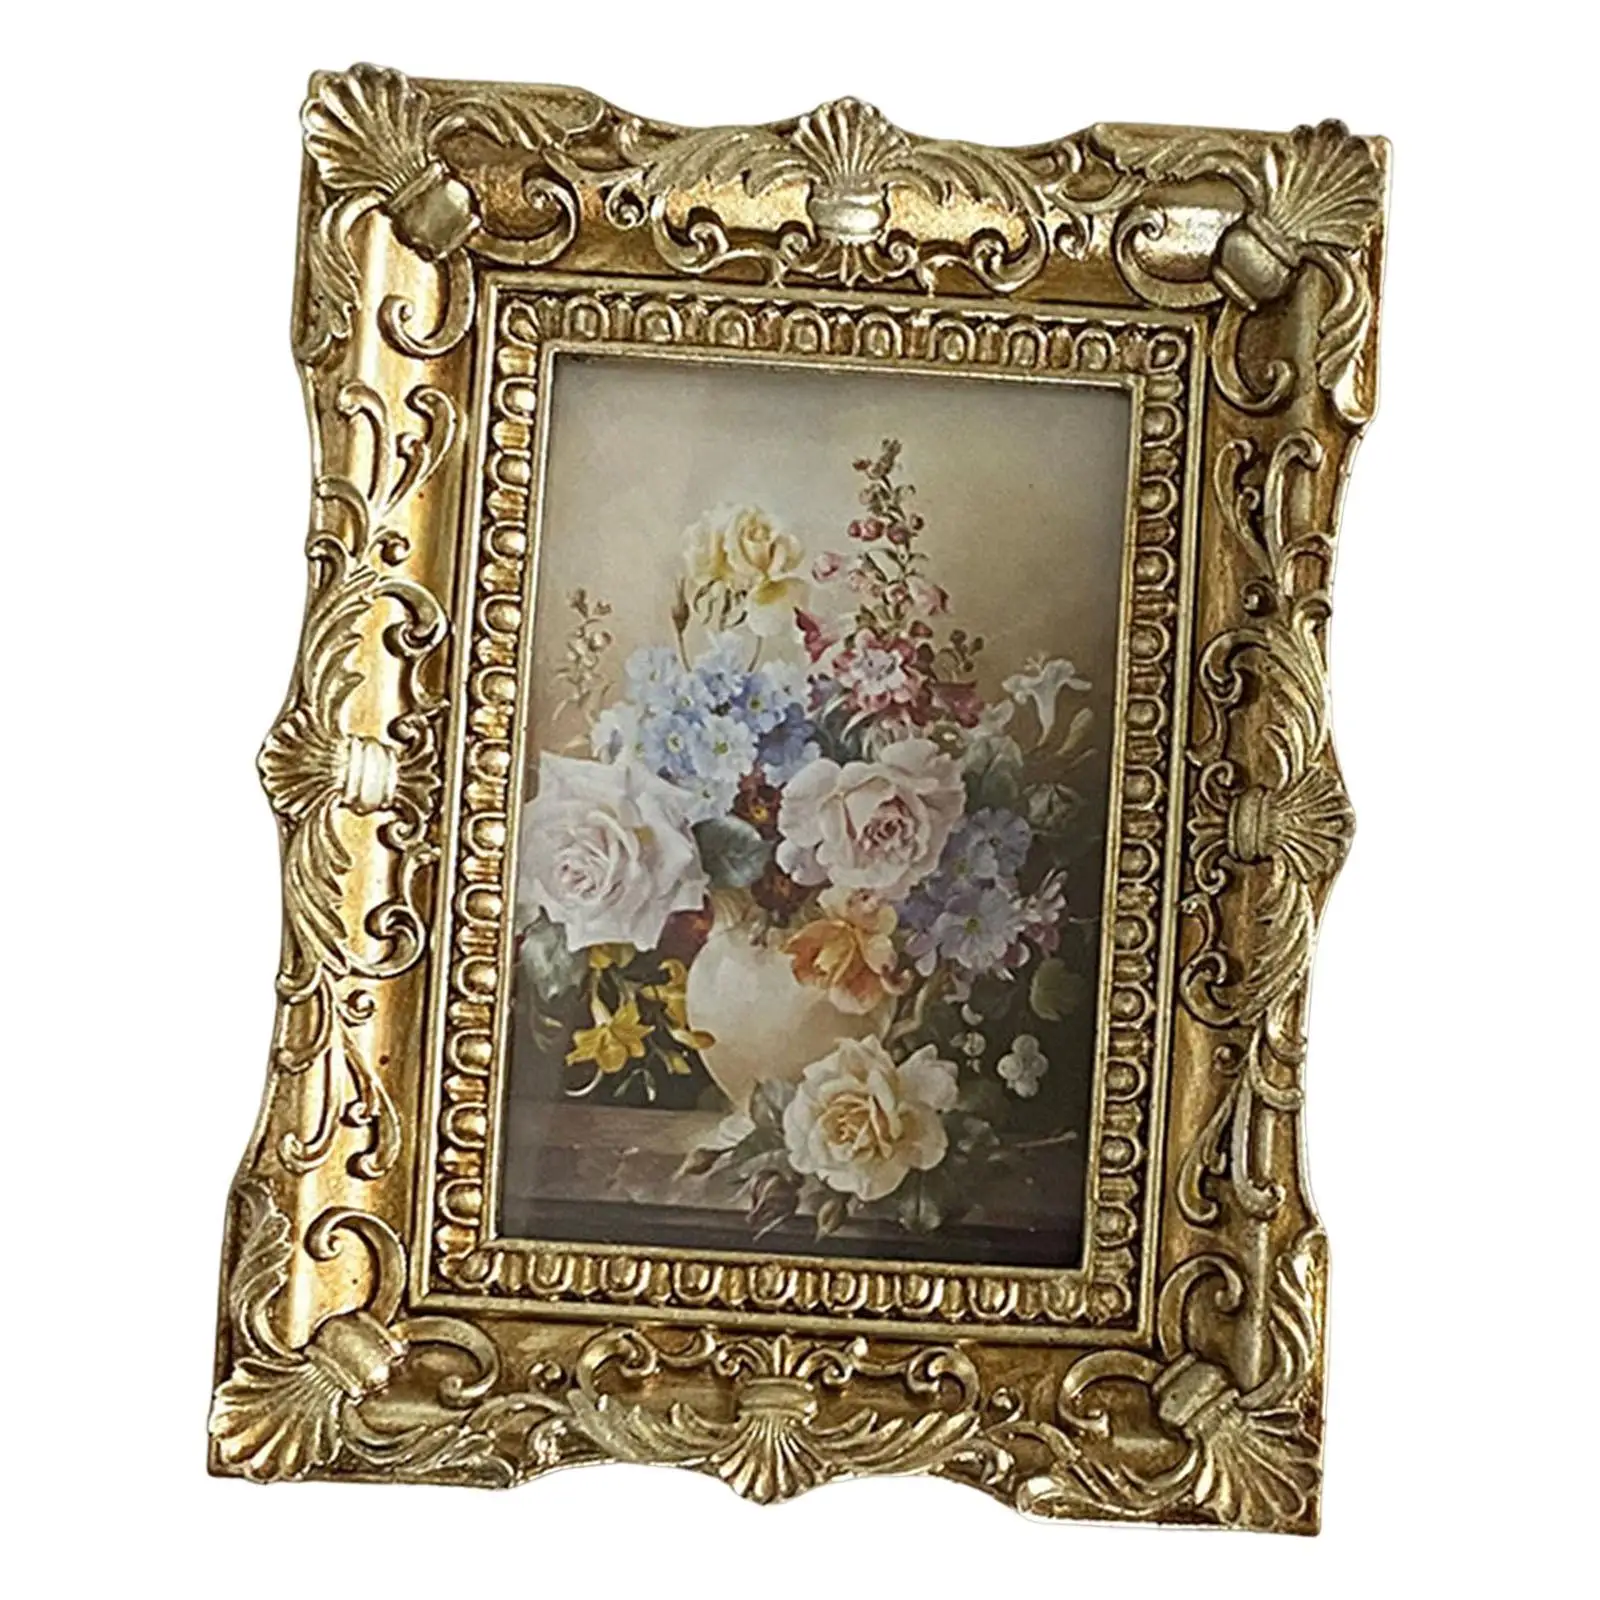 Retro Style Photo Frame Picture Holder Resin Picture Frame Tabletop Wall Hanging for Bedroom Wedding Hallway Decoration Gift